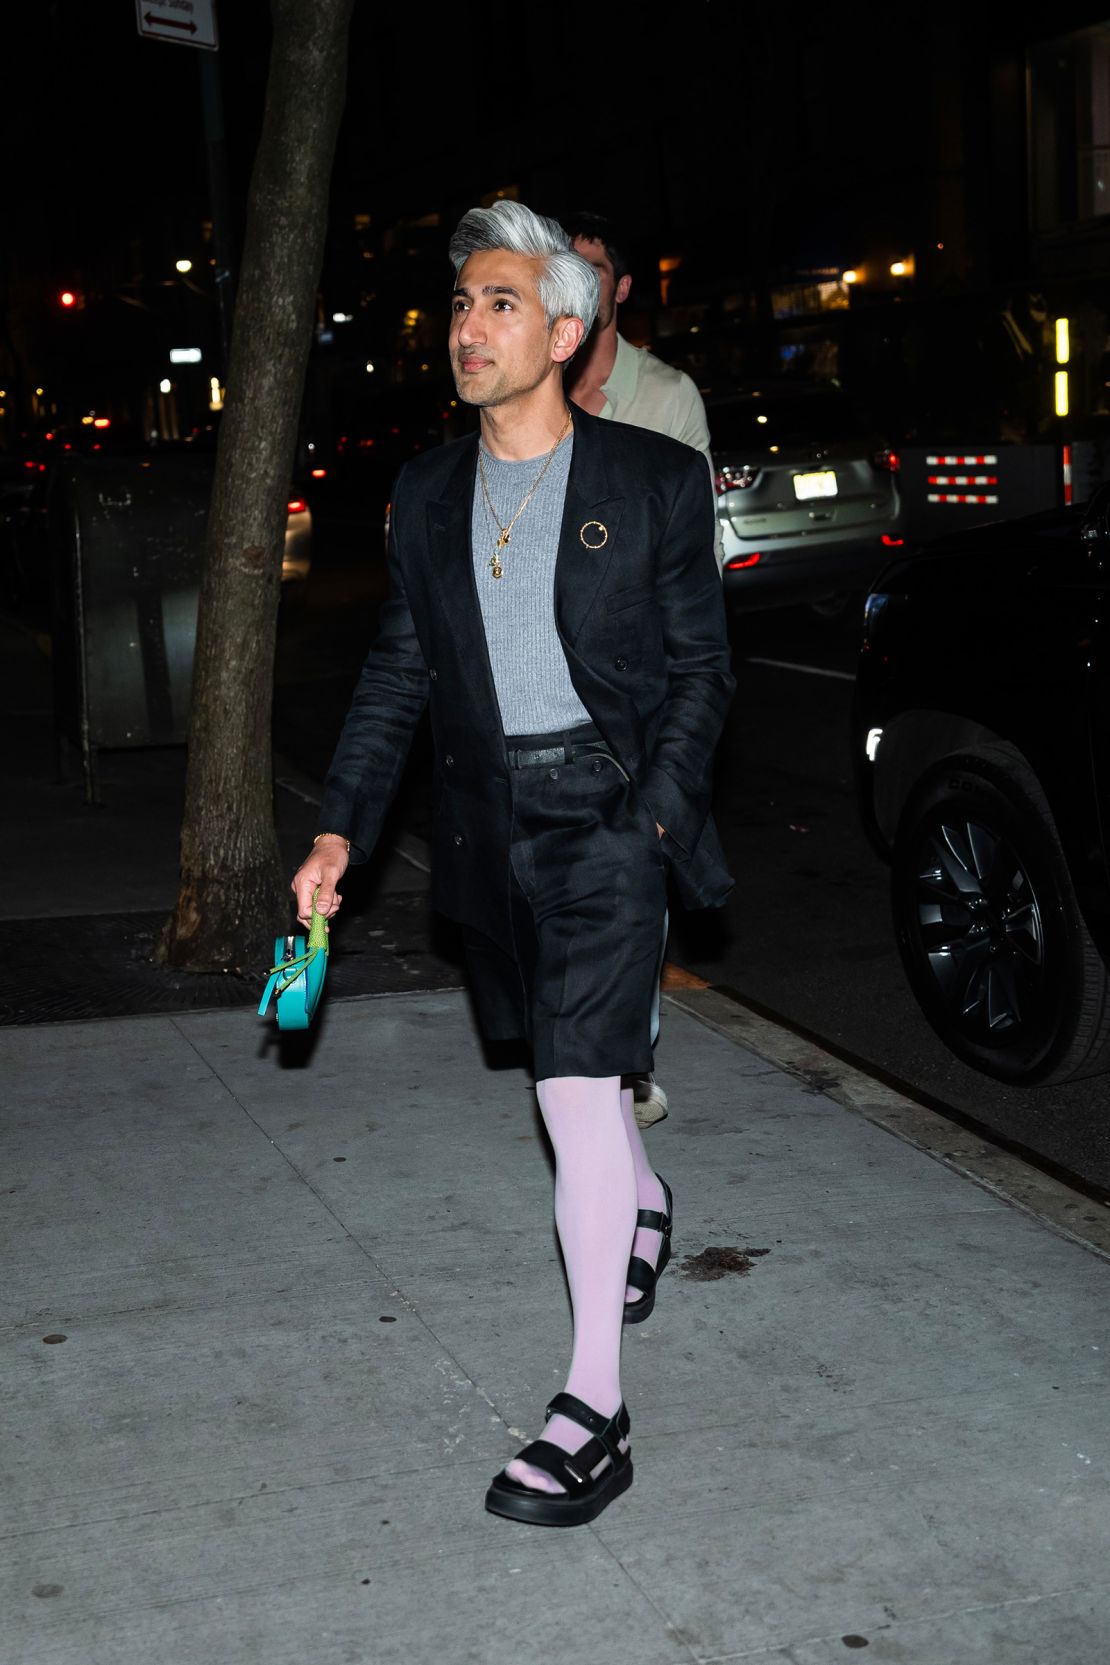 France was spotted sporting lilac tights earlier this week.